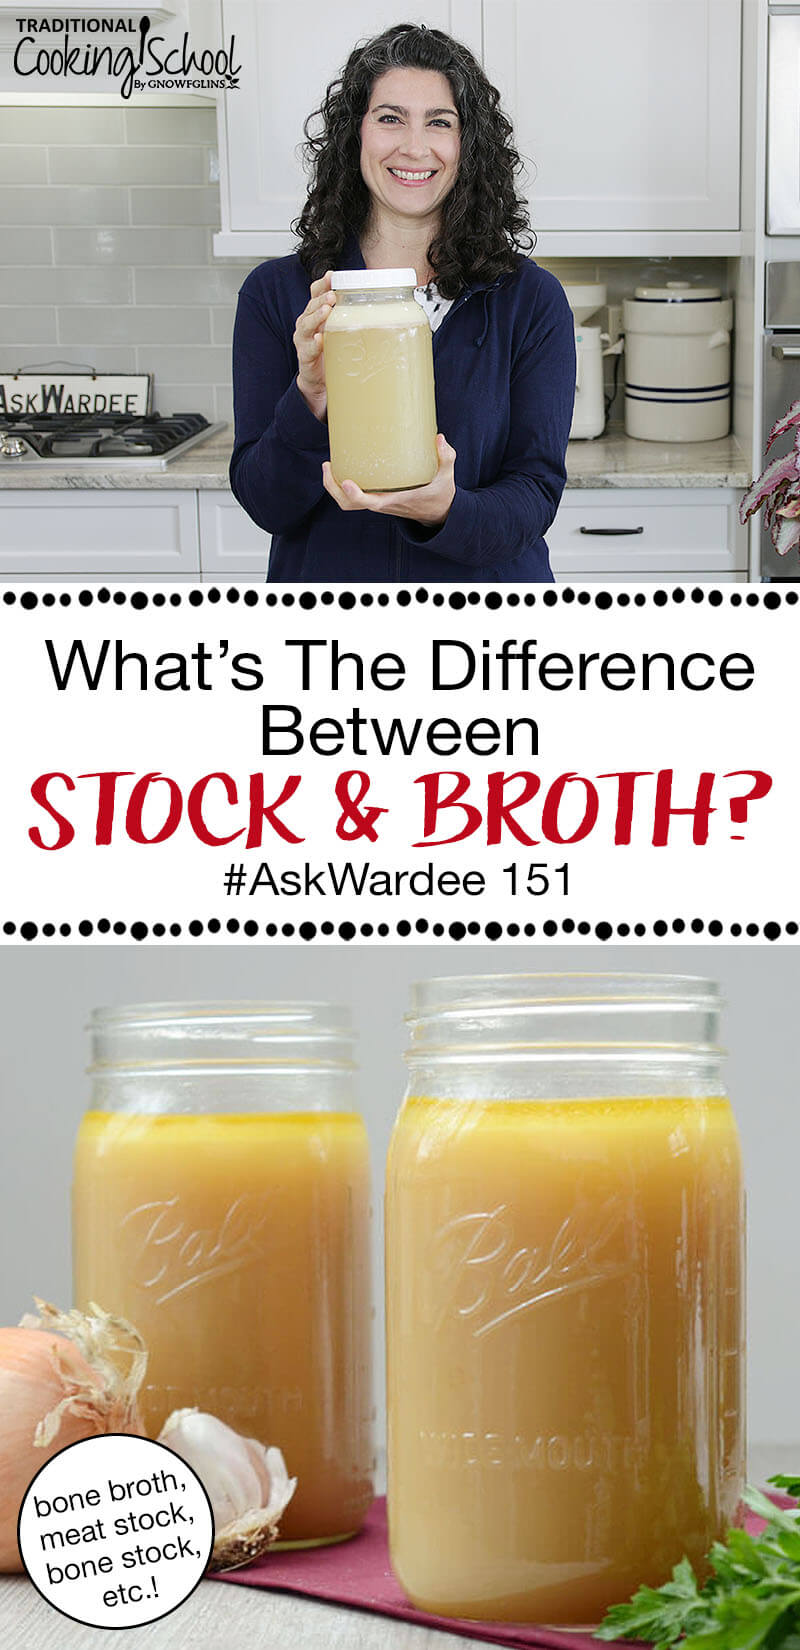 photo collage of different jars of broth, and a smiling woman in her kitchen holding forward a large jar of broth, with text overlay: "What's The Difference Between Stock And Broth #AskWardee 151 (bone broth, bone stock, meat stock, etc.!)"